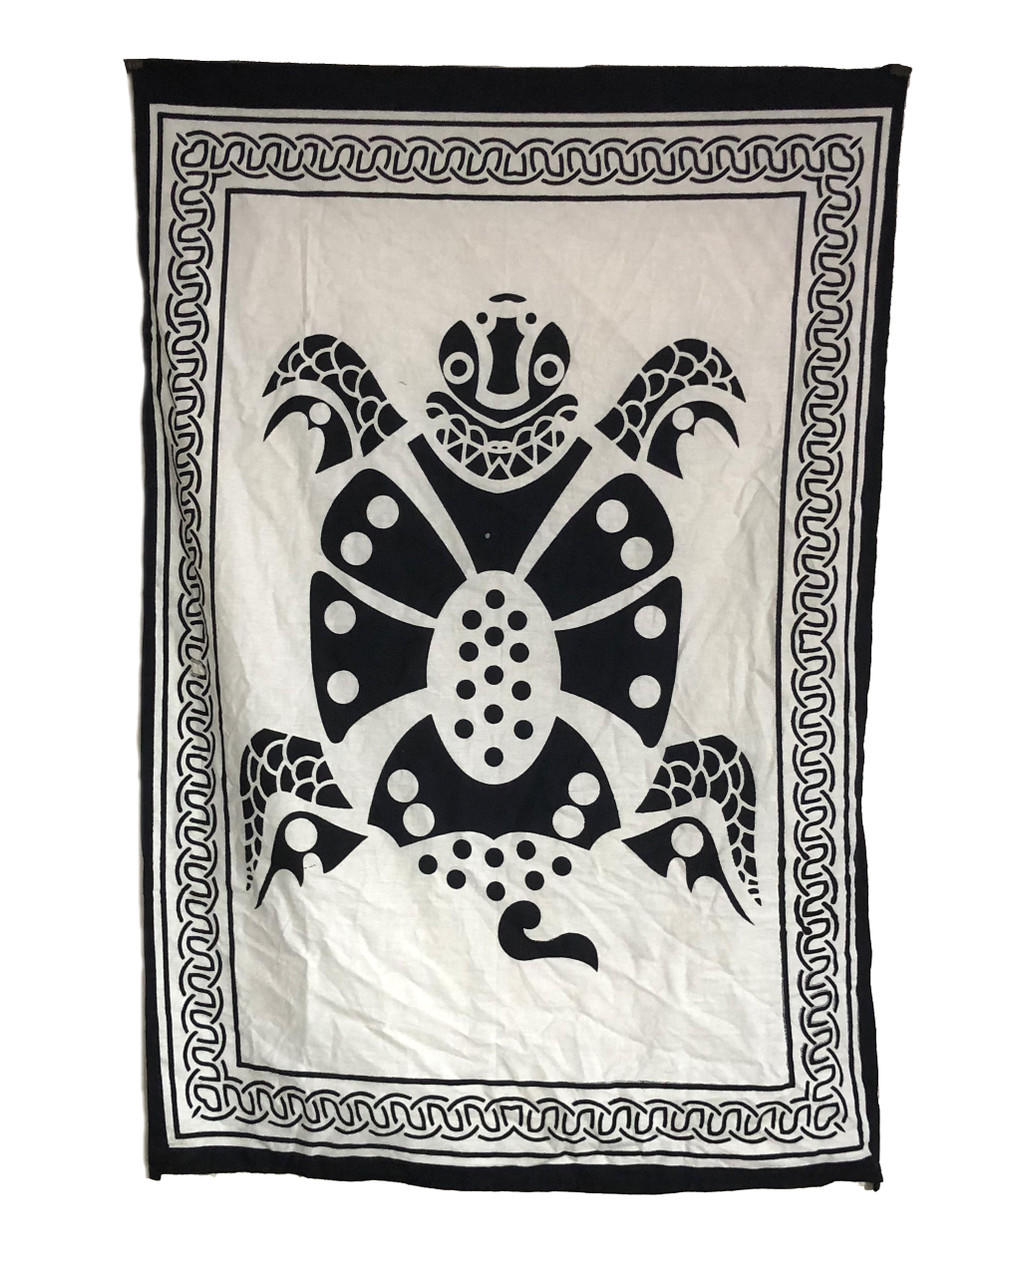 Indian Cotton Tapestry Wall Hanging